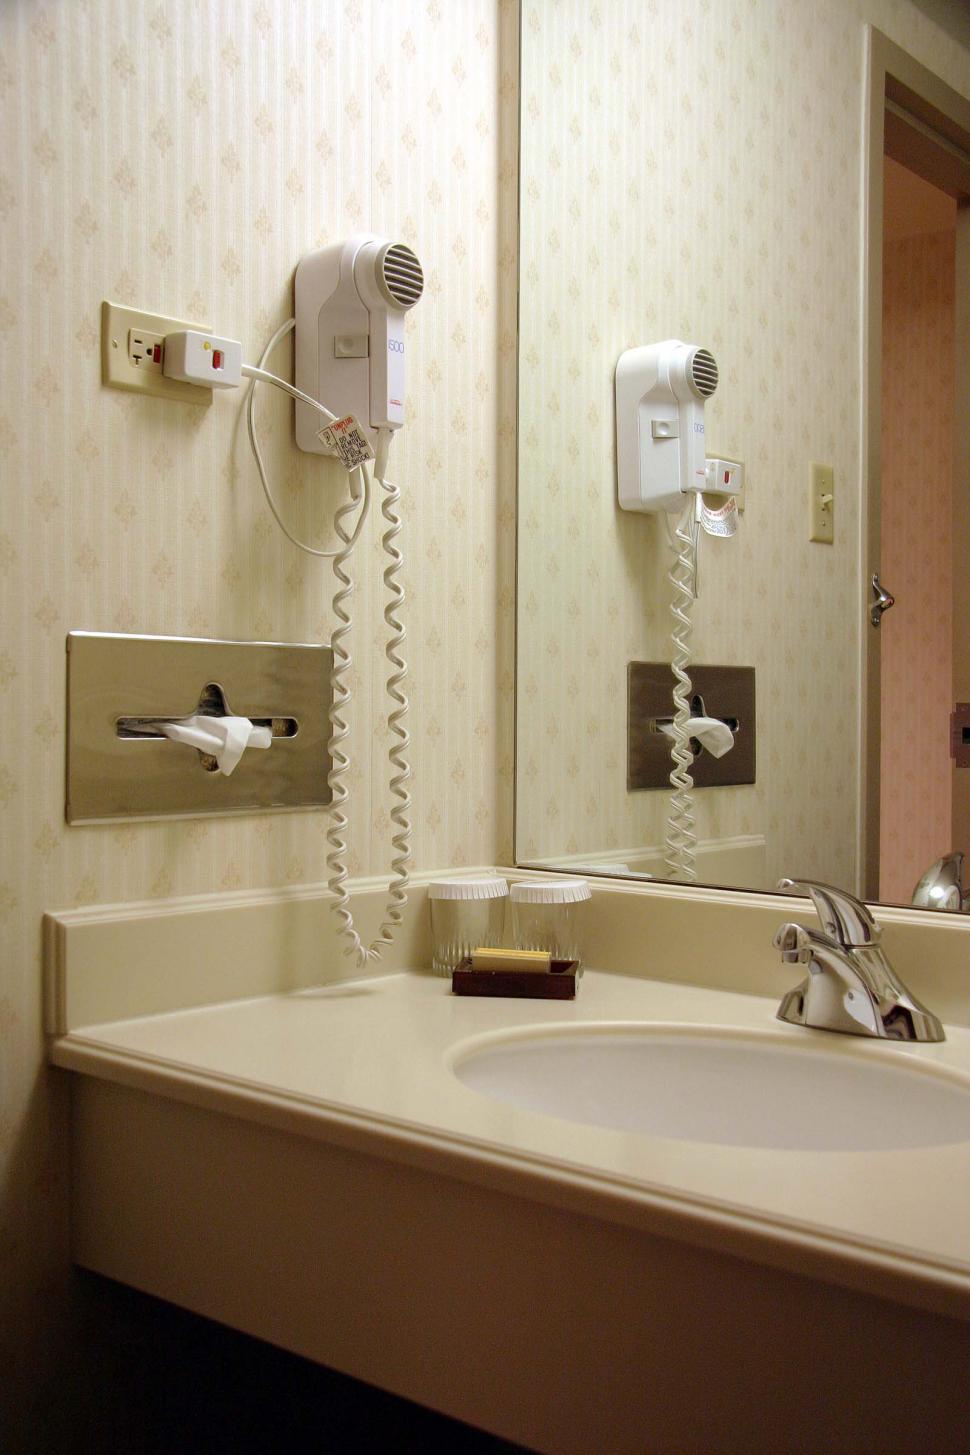 Free Image of Bathroom Sink With Wall-Mounted Phone 